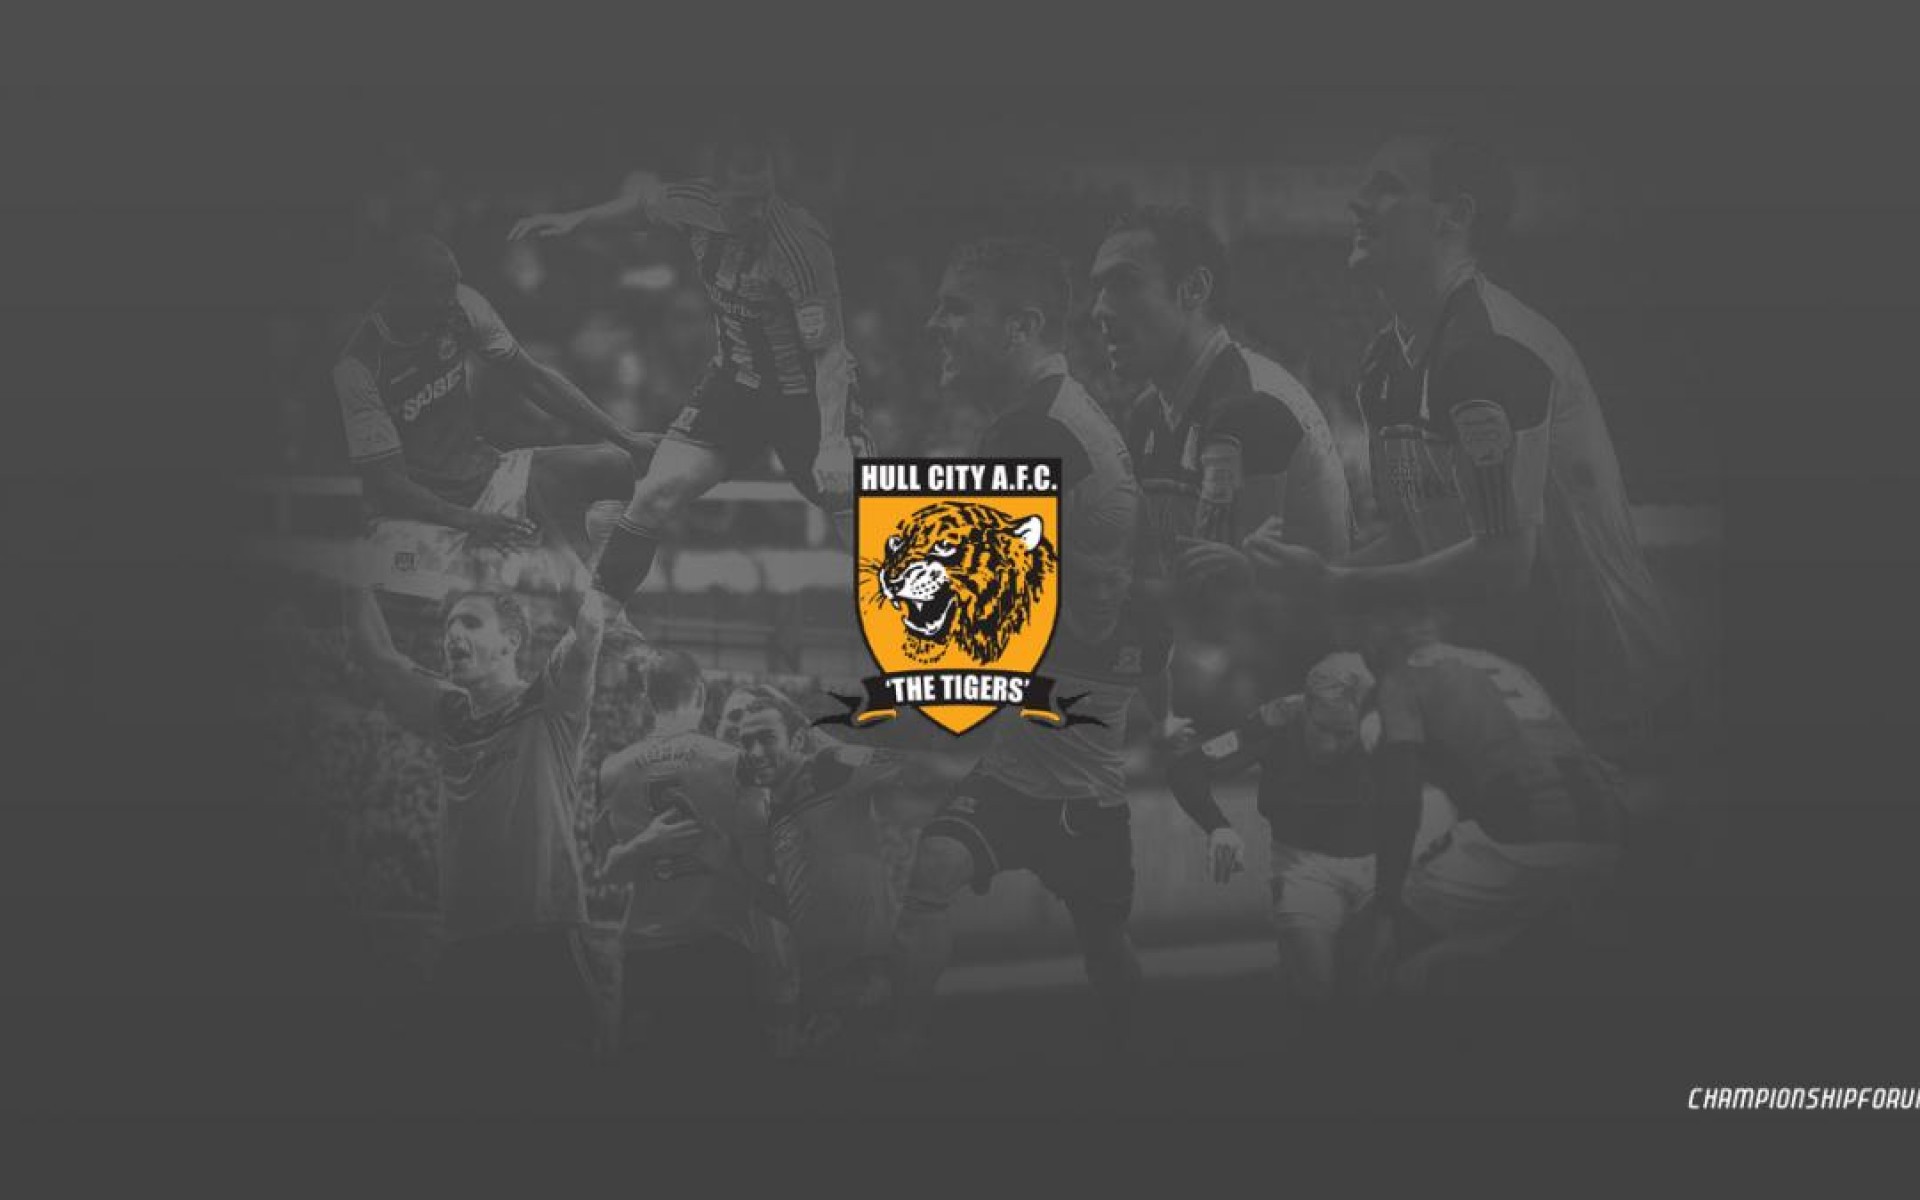 Hull Fc Wallpaper together with hull city england also swansea